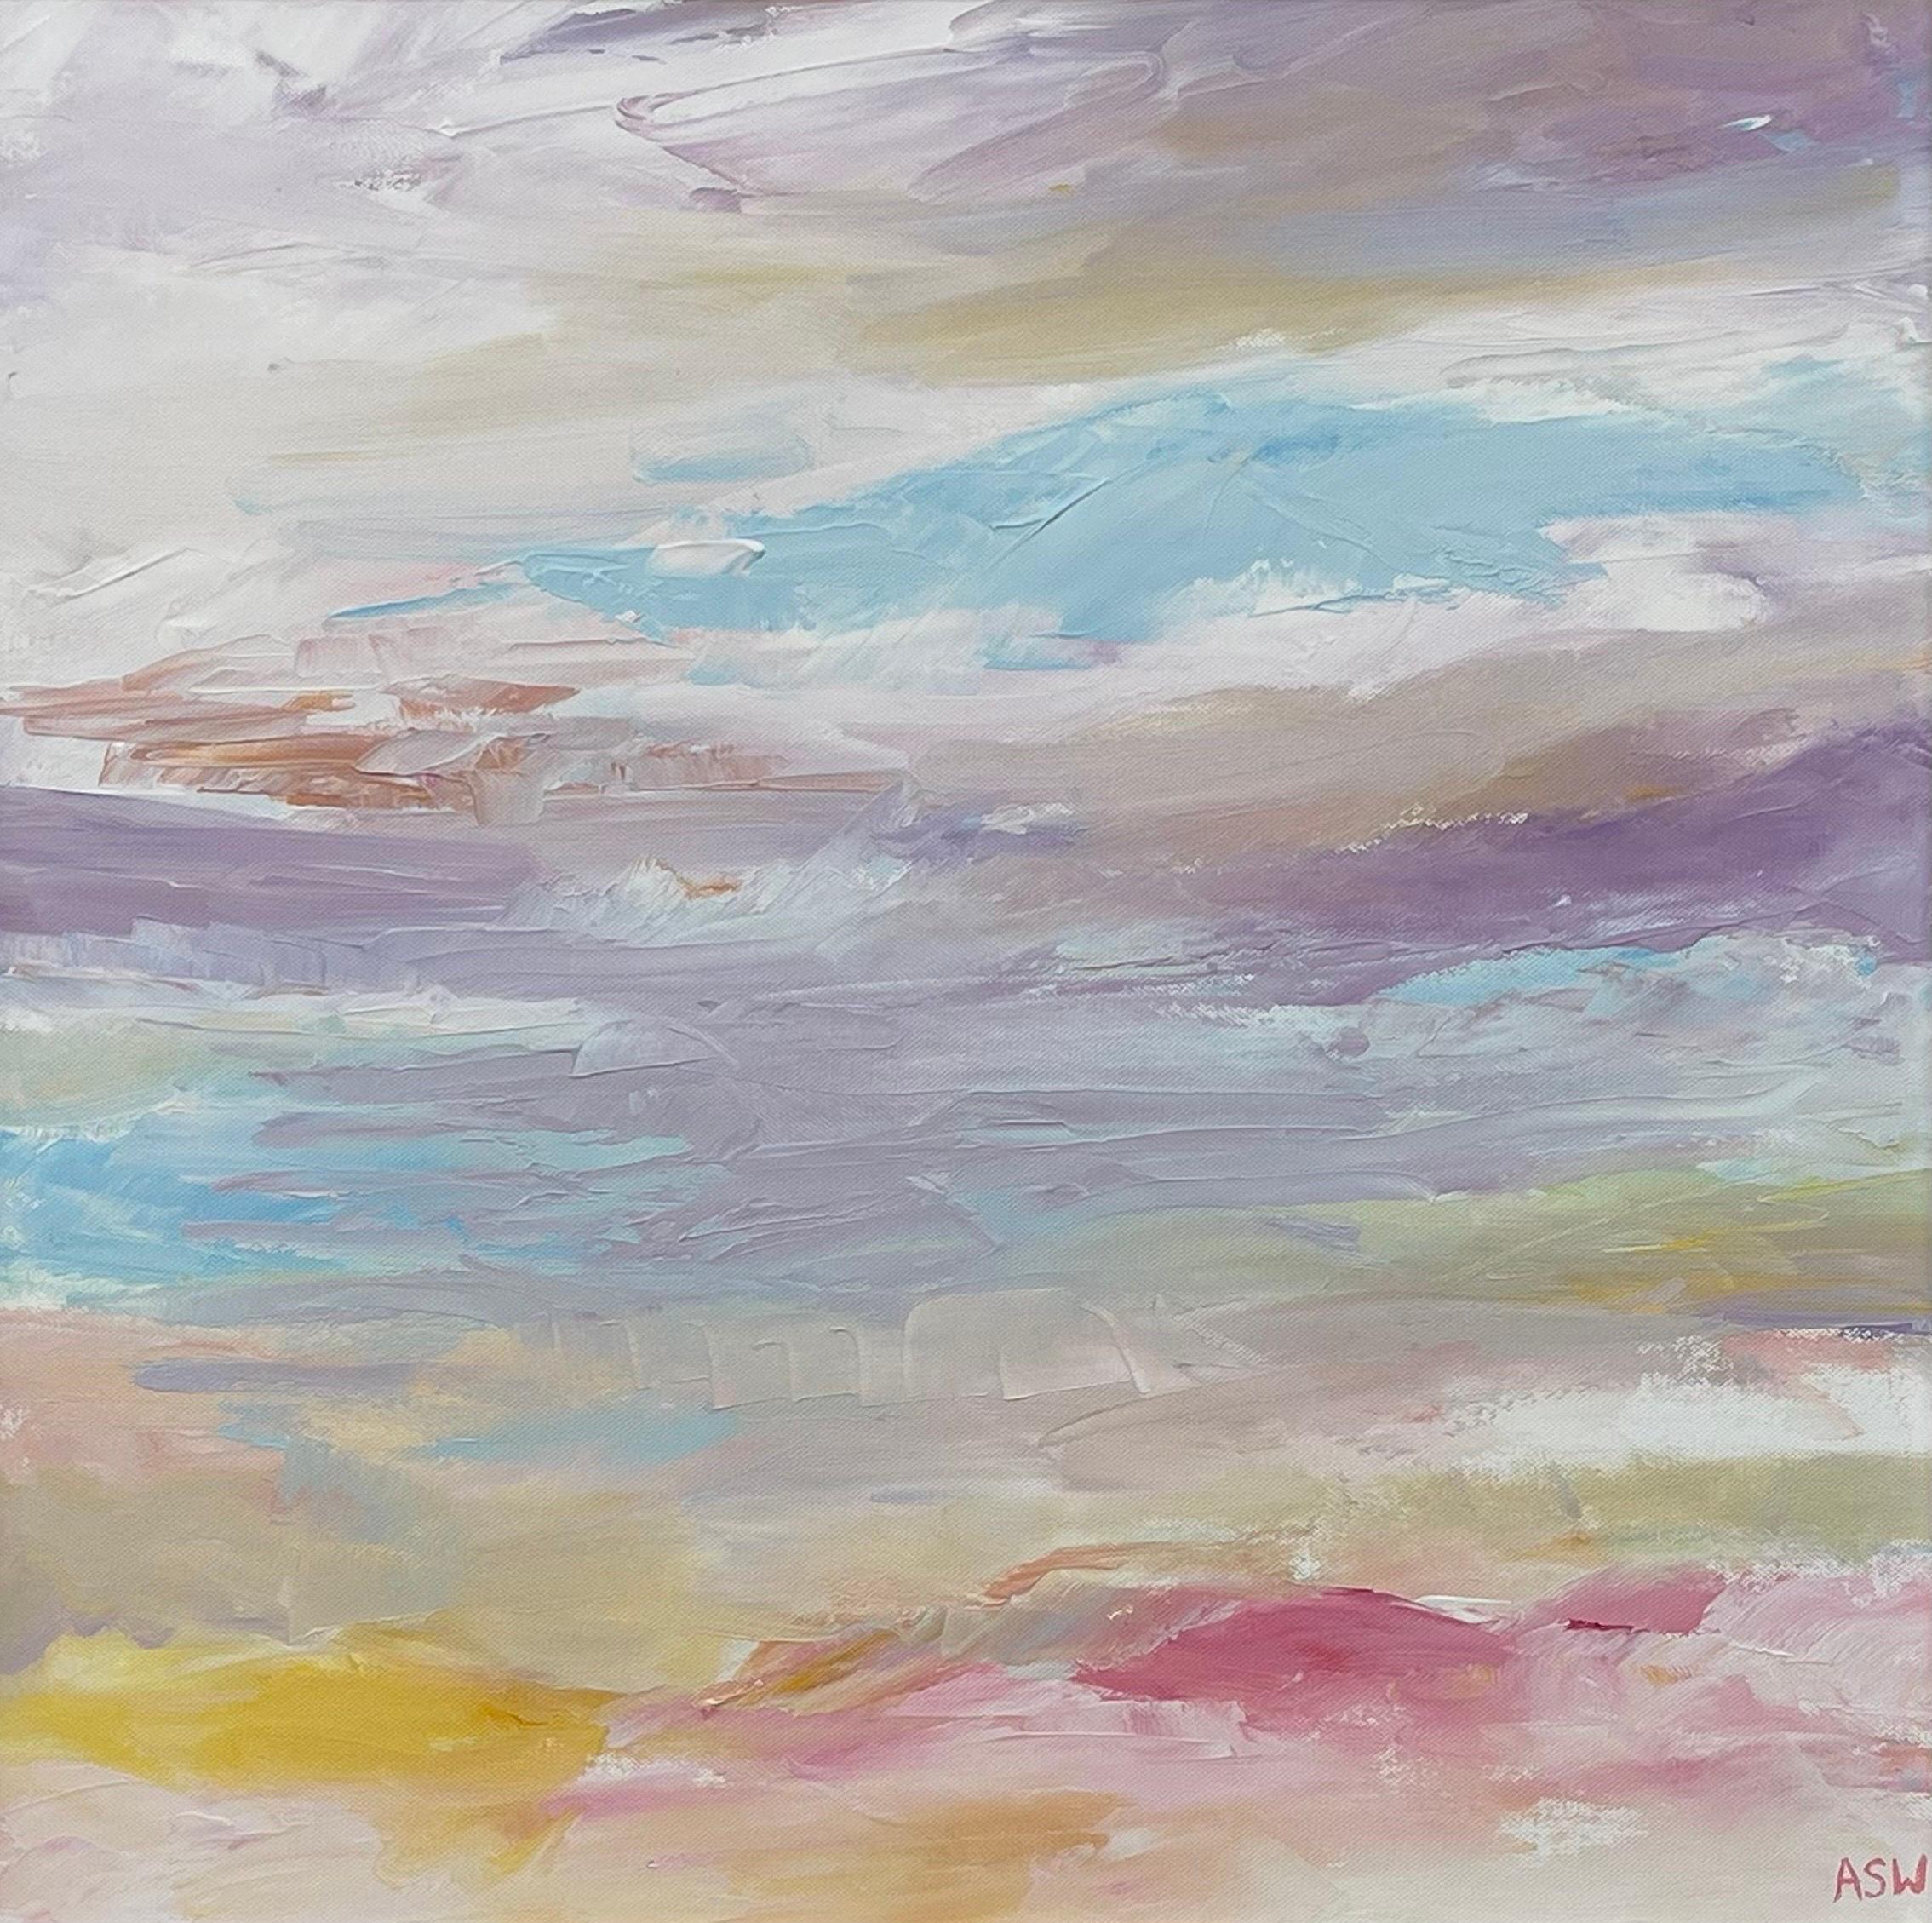 Abstract Impressionist Seascape Landscape by Contemporary British Artist, Angela Wakefield. Entitled 'Serenity #03', this atmospheric painting depicts an imagined scene using muted pastel colours. This unique original forms part of a new body of